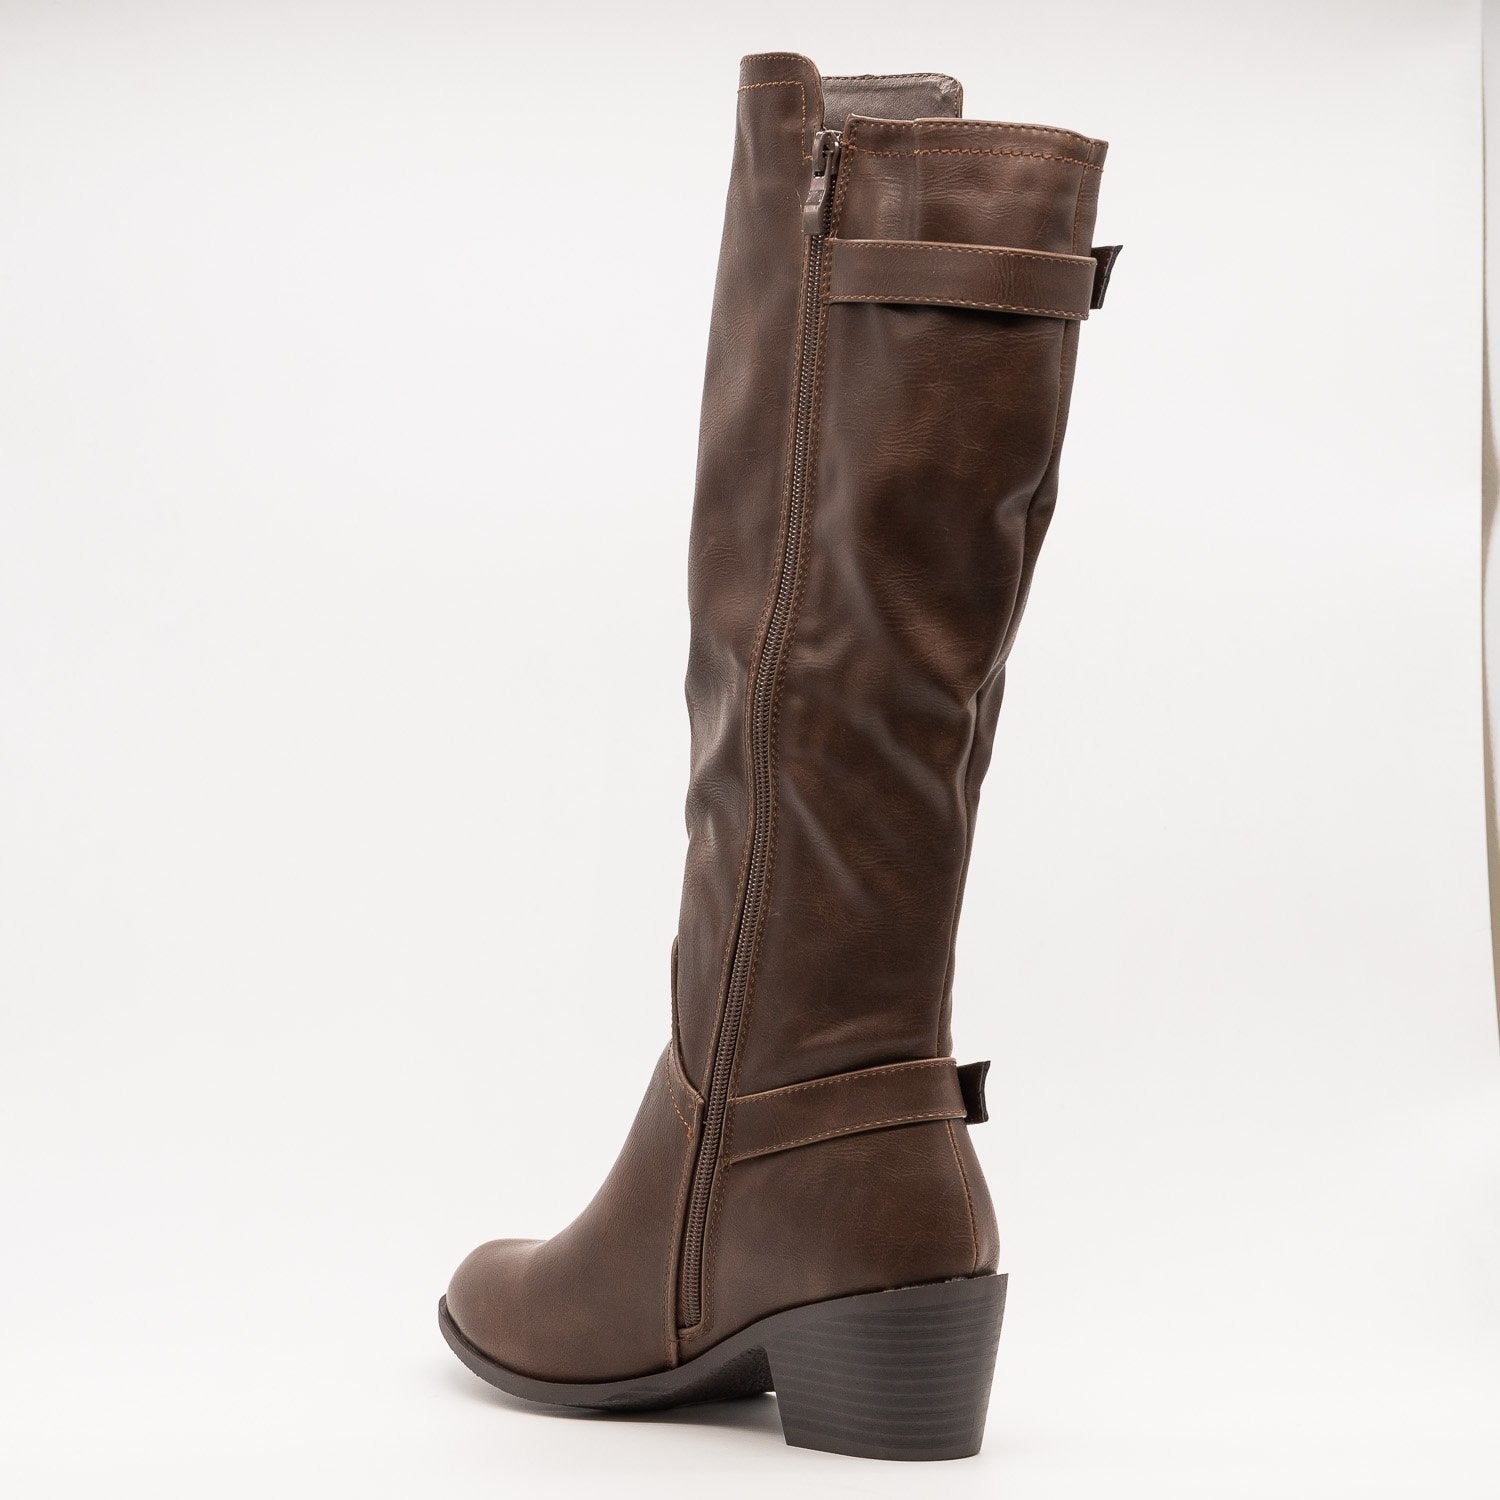 cute riding boots for fall